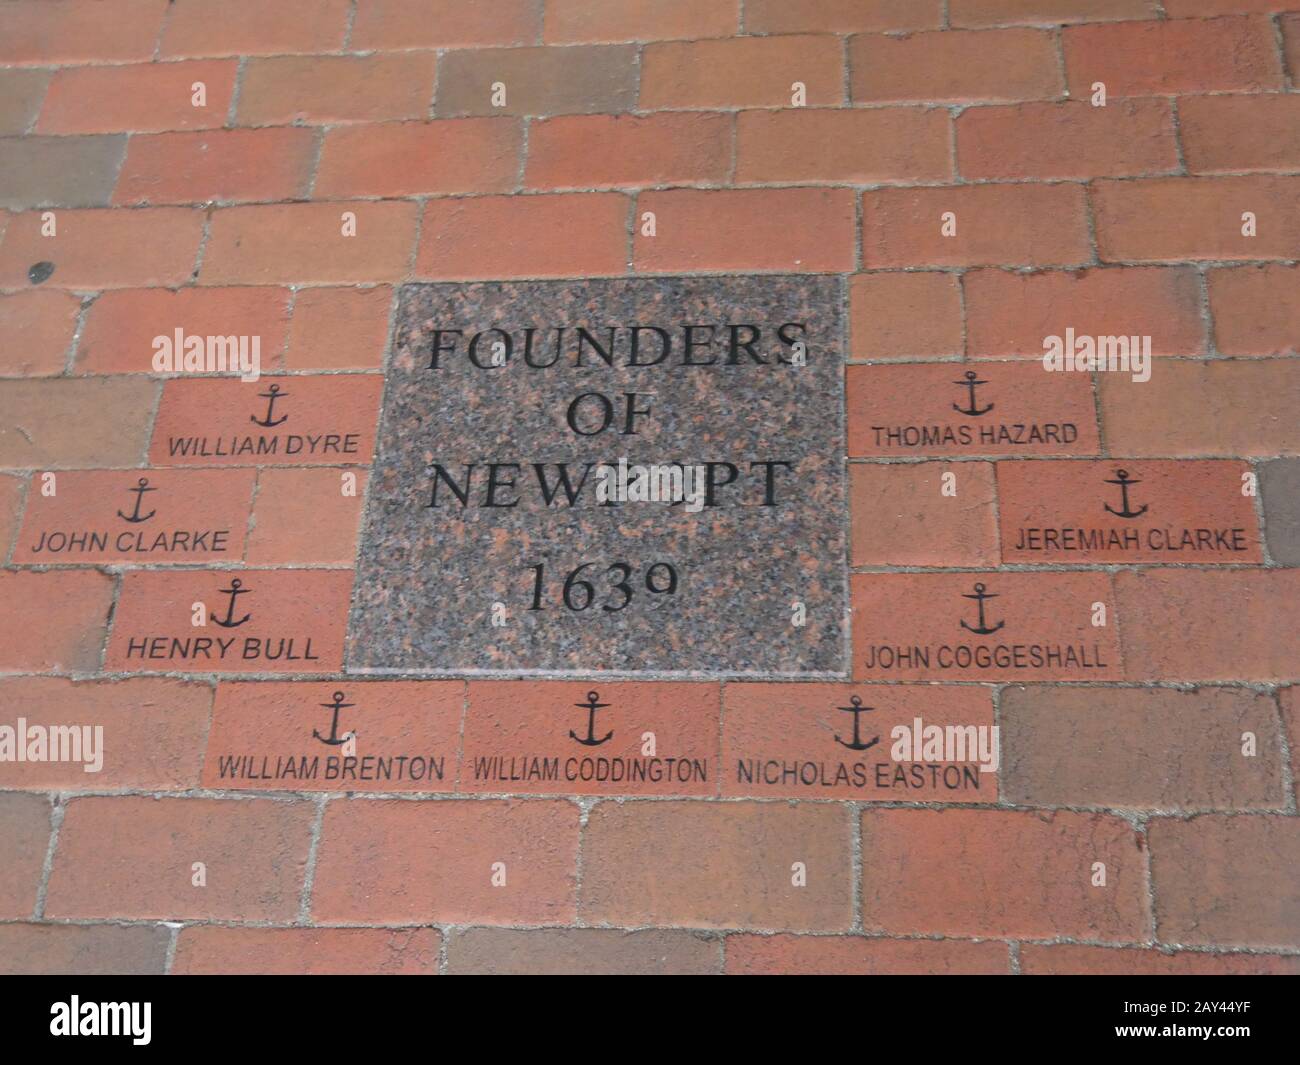 Newport, Rhode Island-September 2017: Names of the founders of Newport in 1639 painted on the brick pavement at the Newport Museum of History. Stock Photo